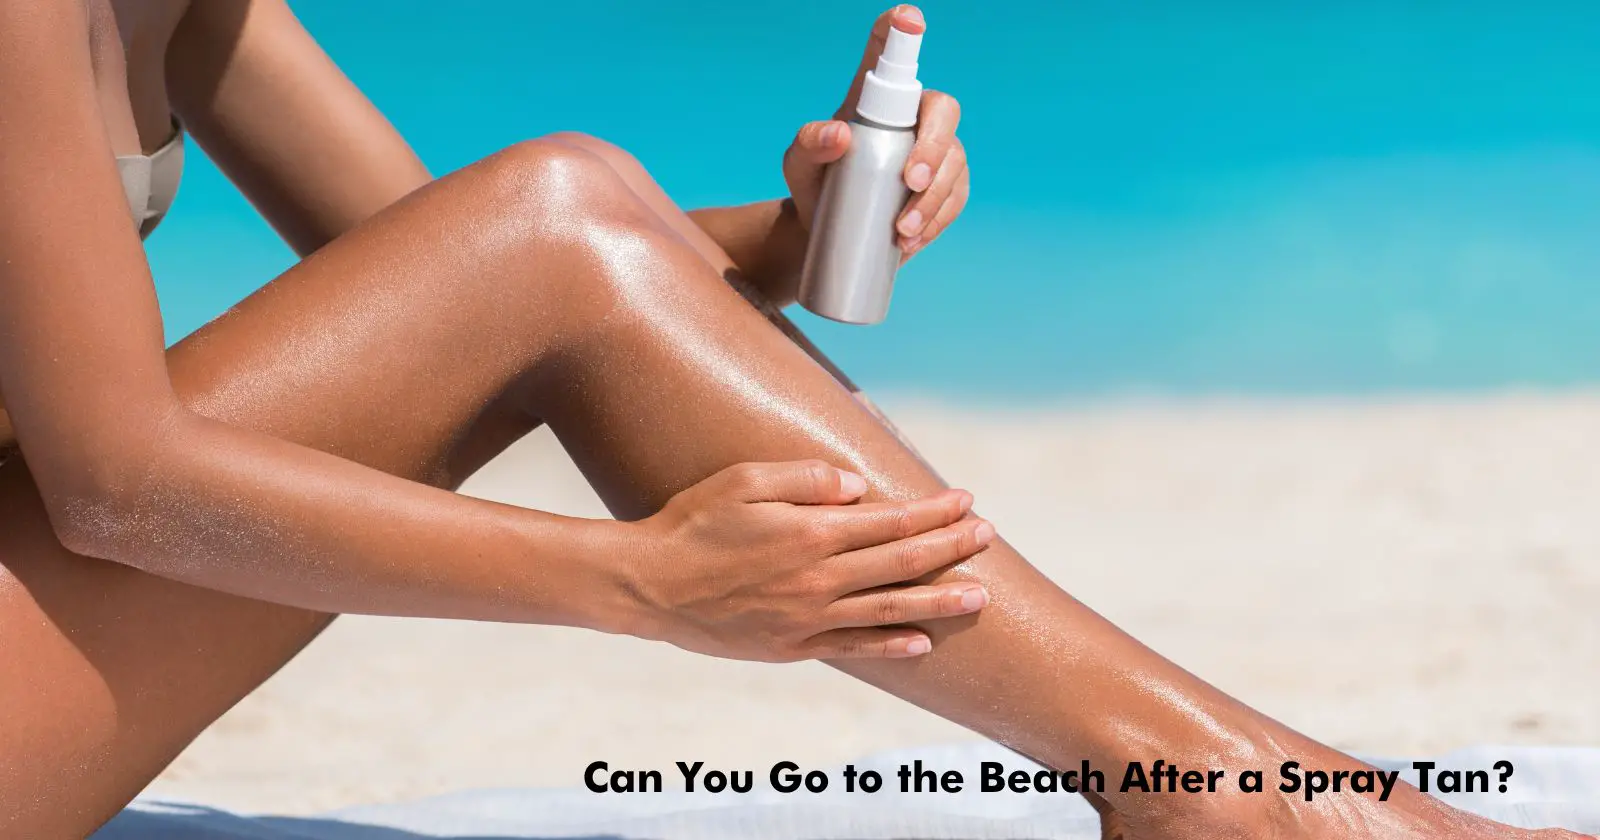 Can You Go to the Beach After a Spray Tan